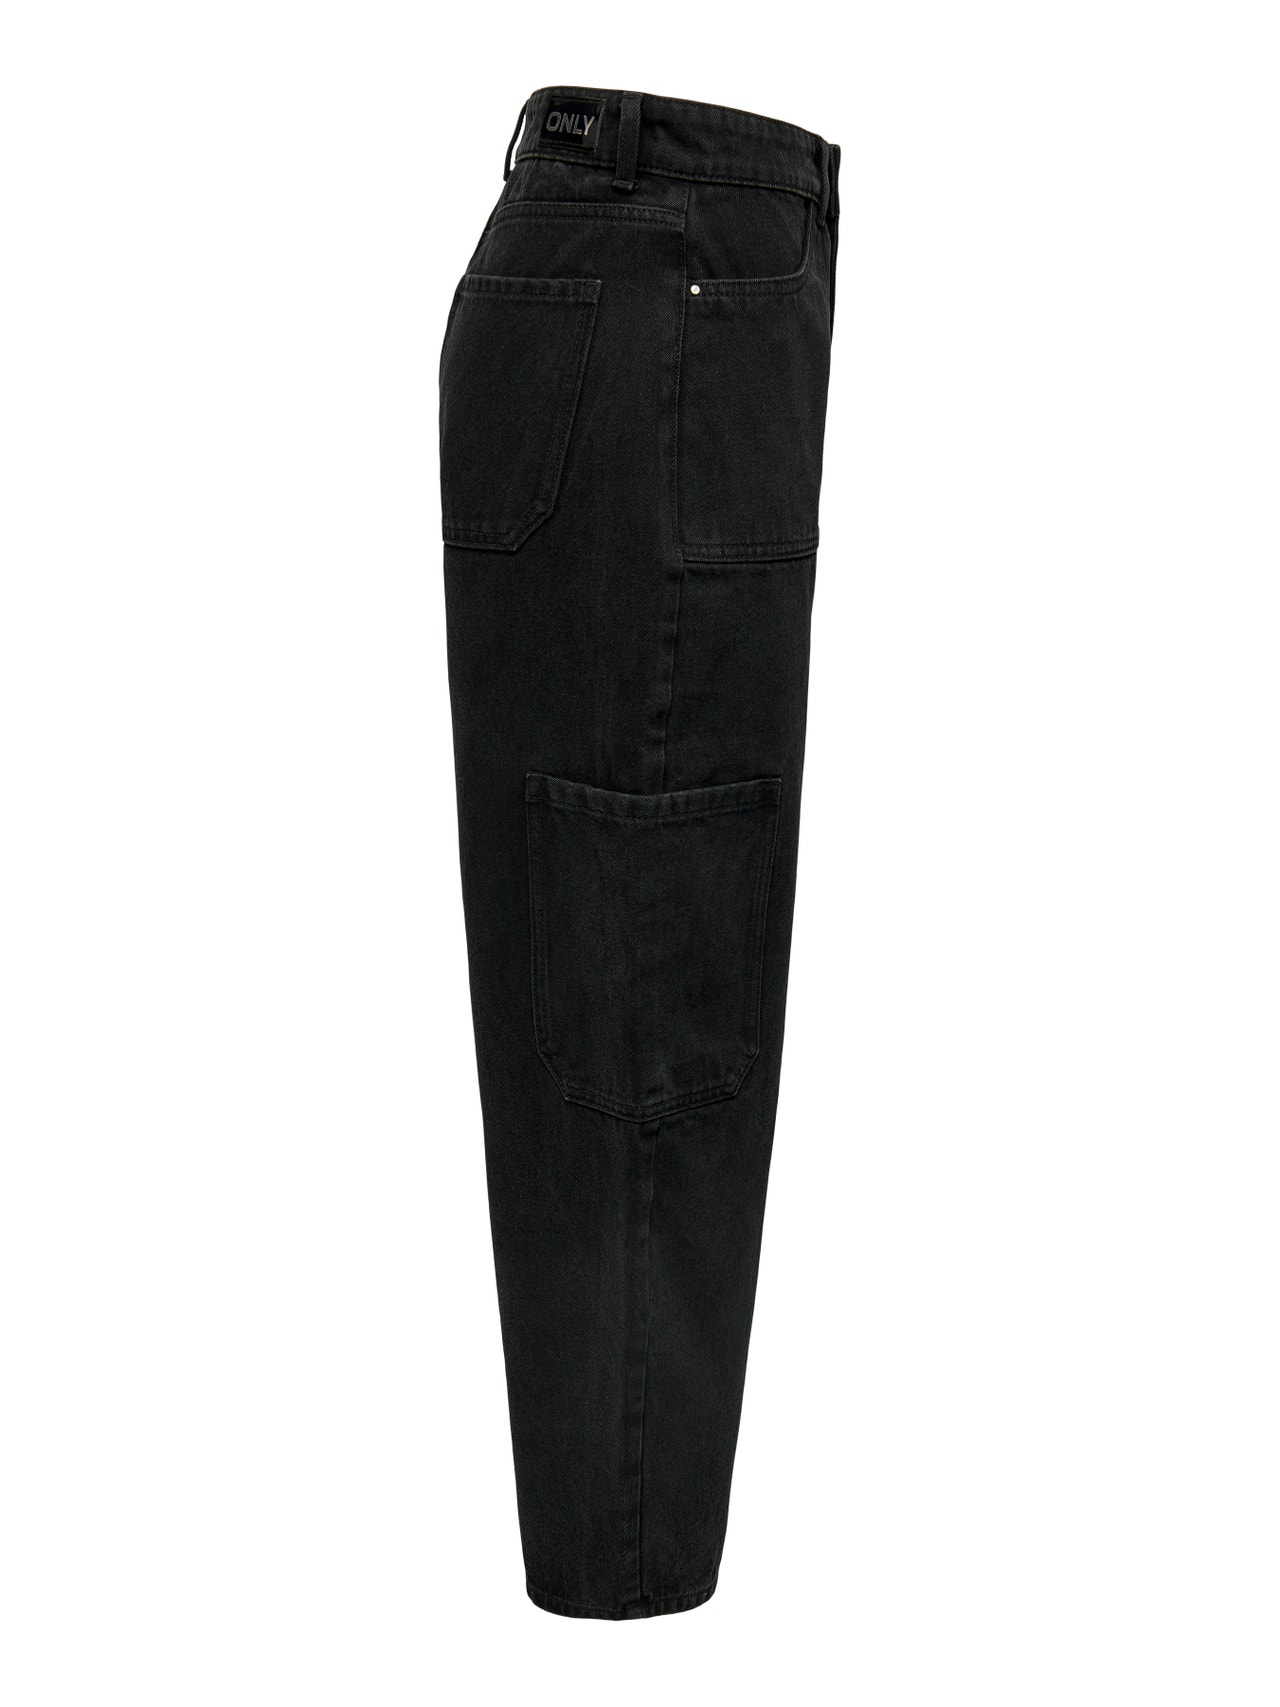 ONLY ONLMILANI MW corte globo, tipo cargo, al tobillo Jeans Loose fit -Washed Black - 15278385